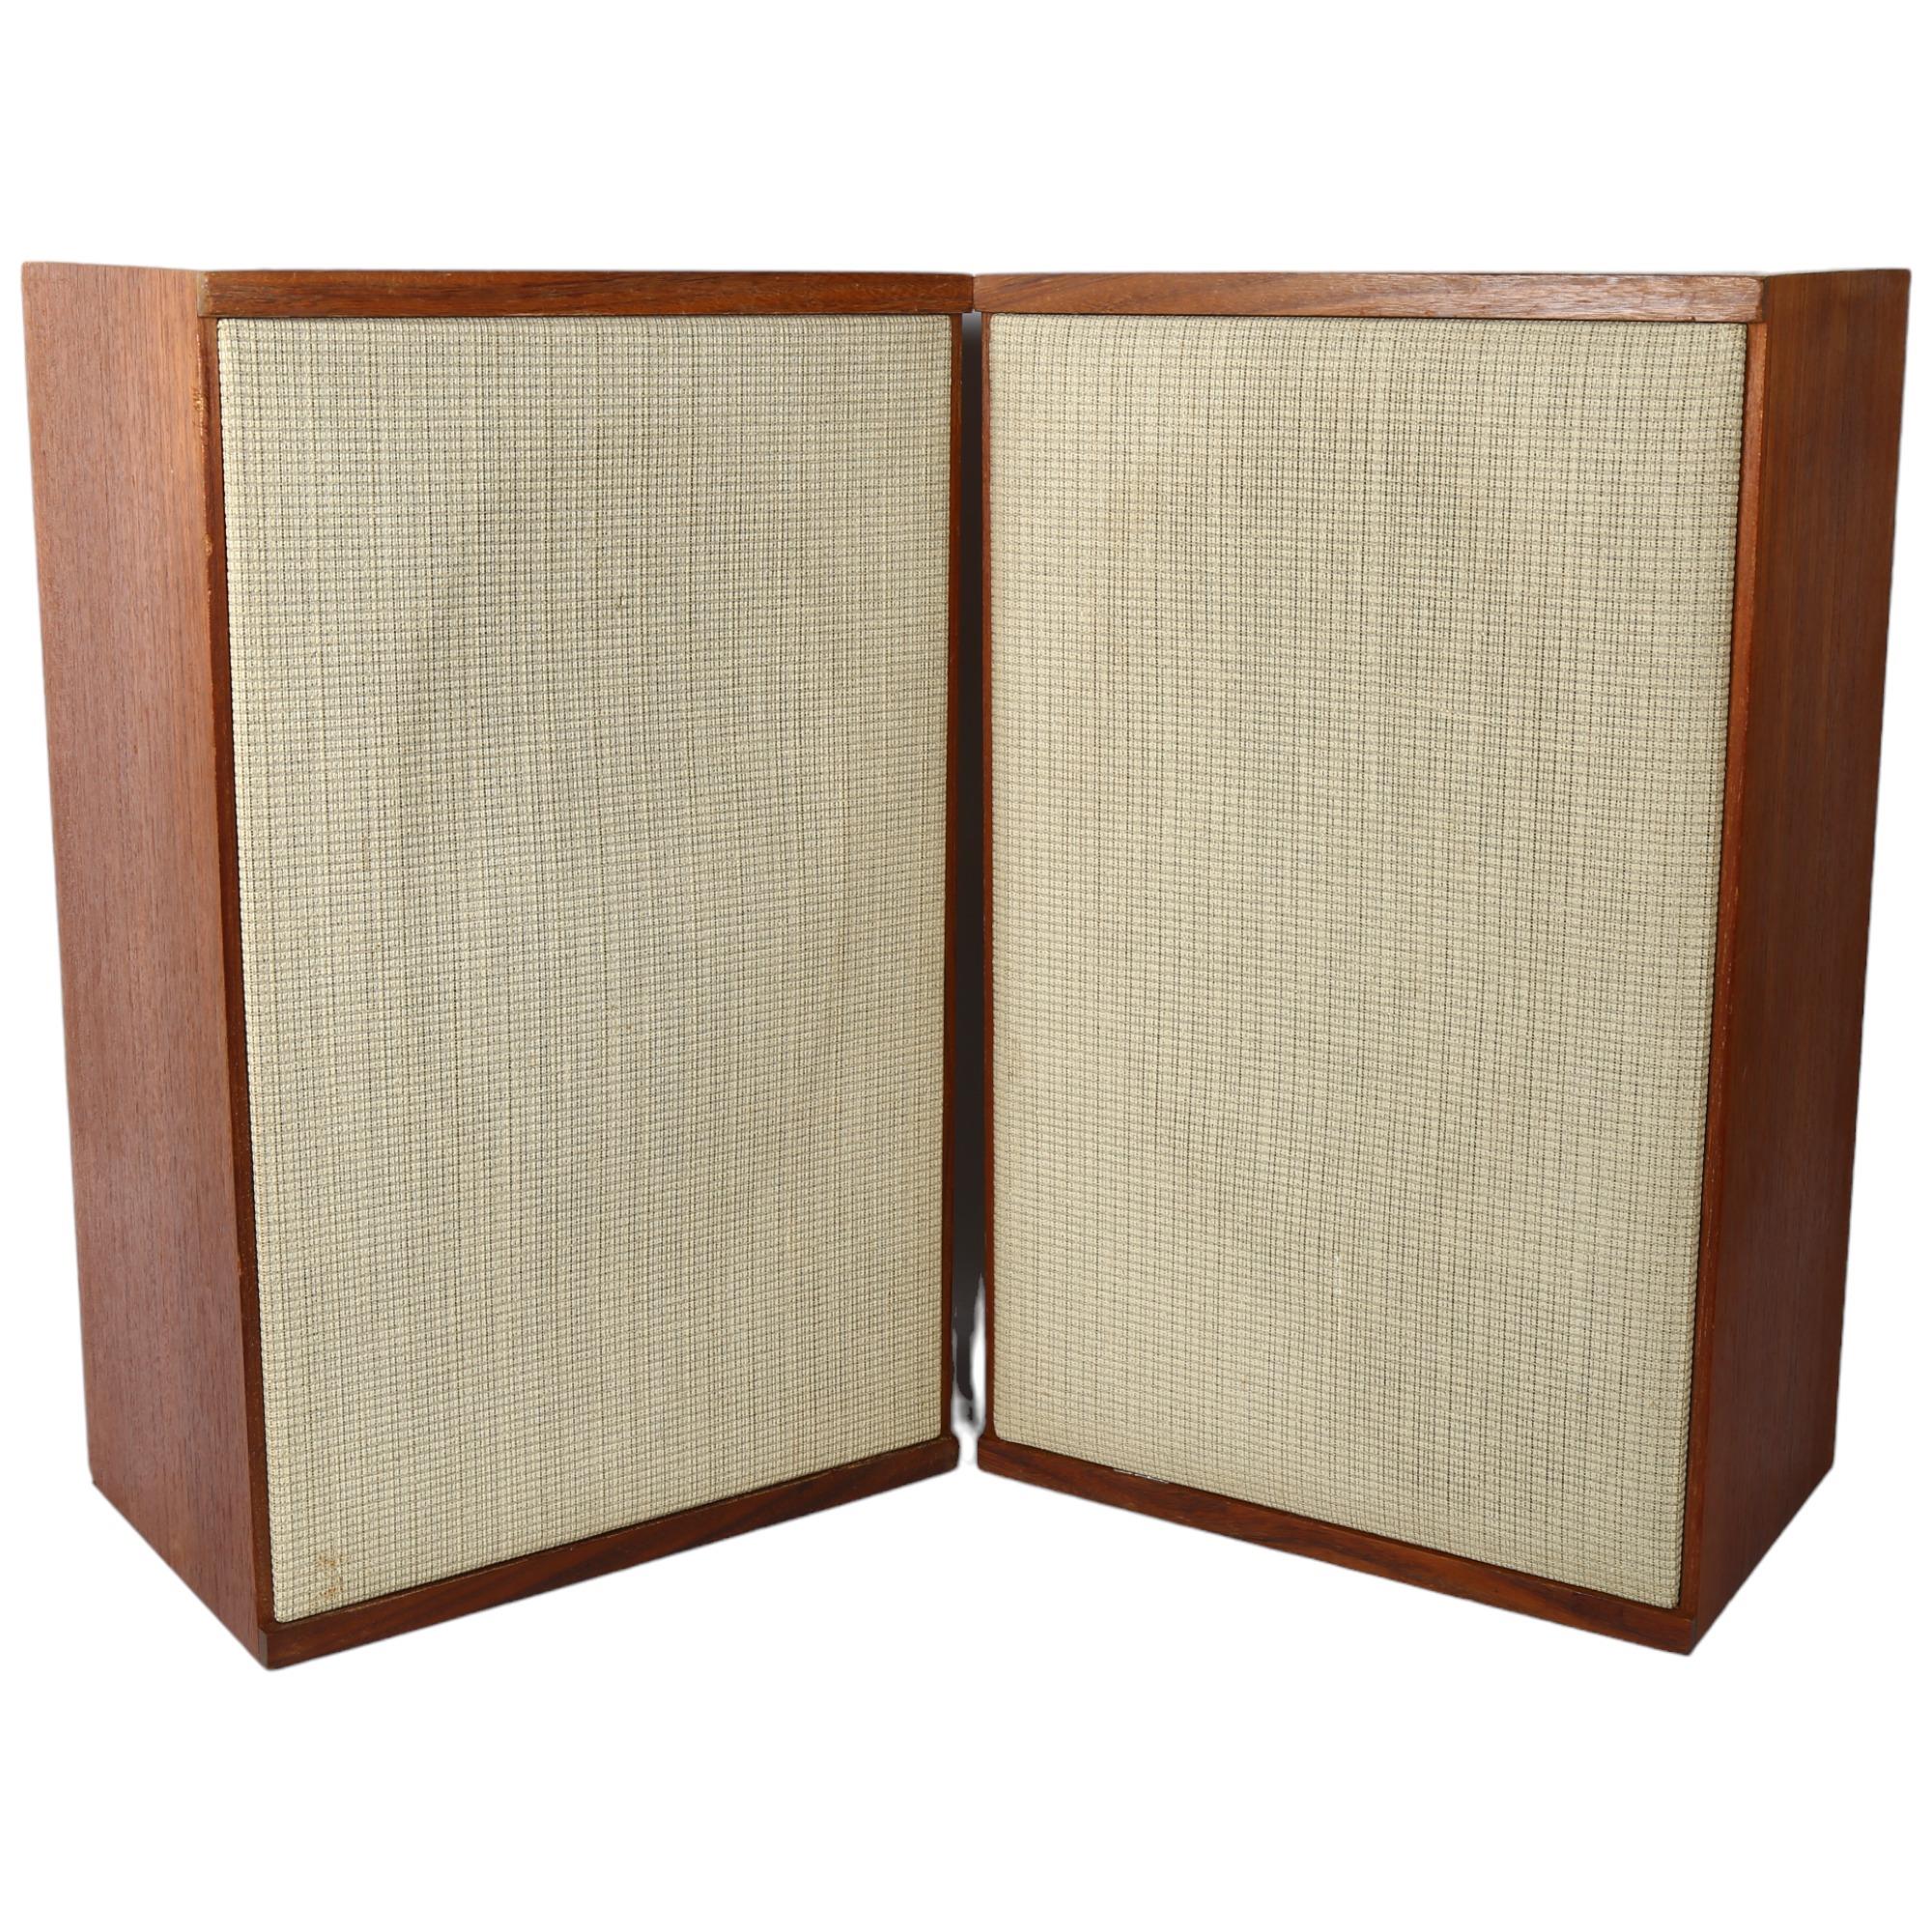 A pair of Vintage 1970s wooden floor standing speakers, unmarked in terms of maker's label, no